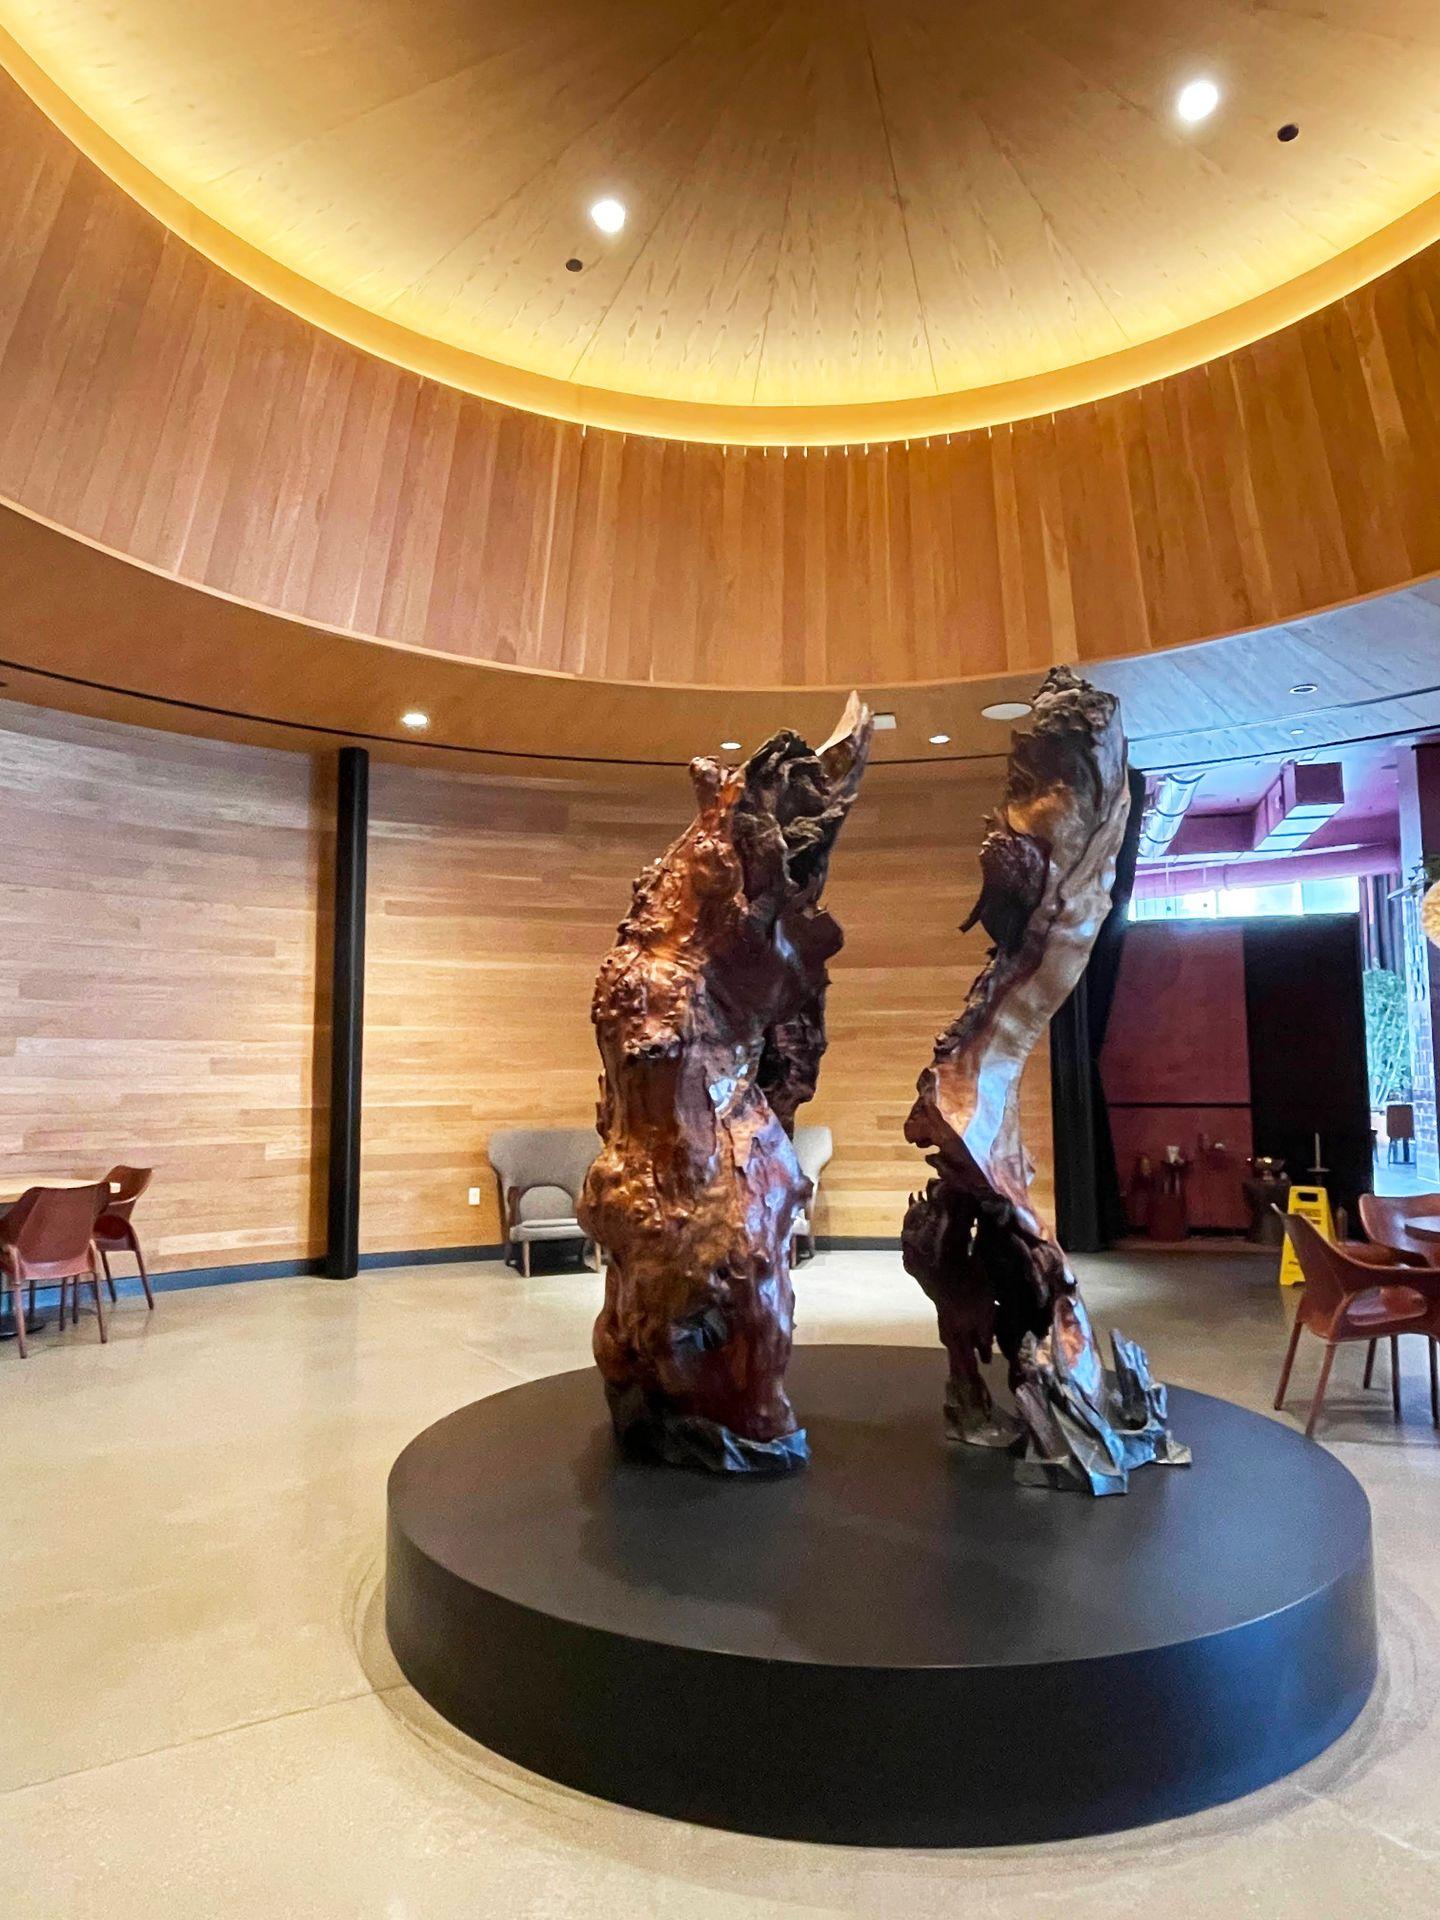 An abstract wooden sculpture in the lobby of Hotel Indigo.